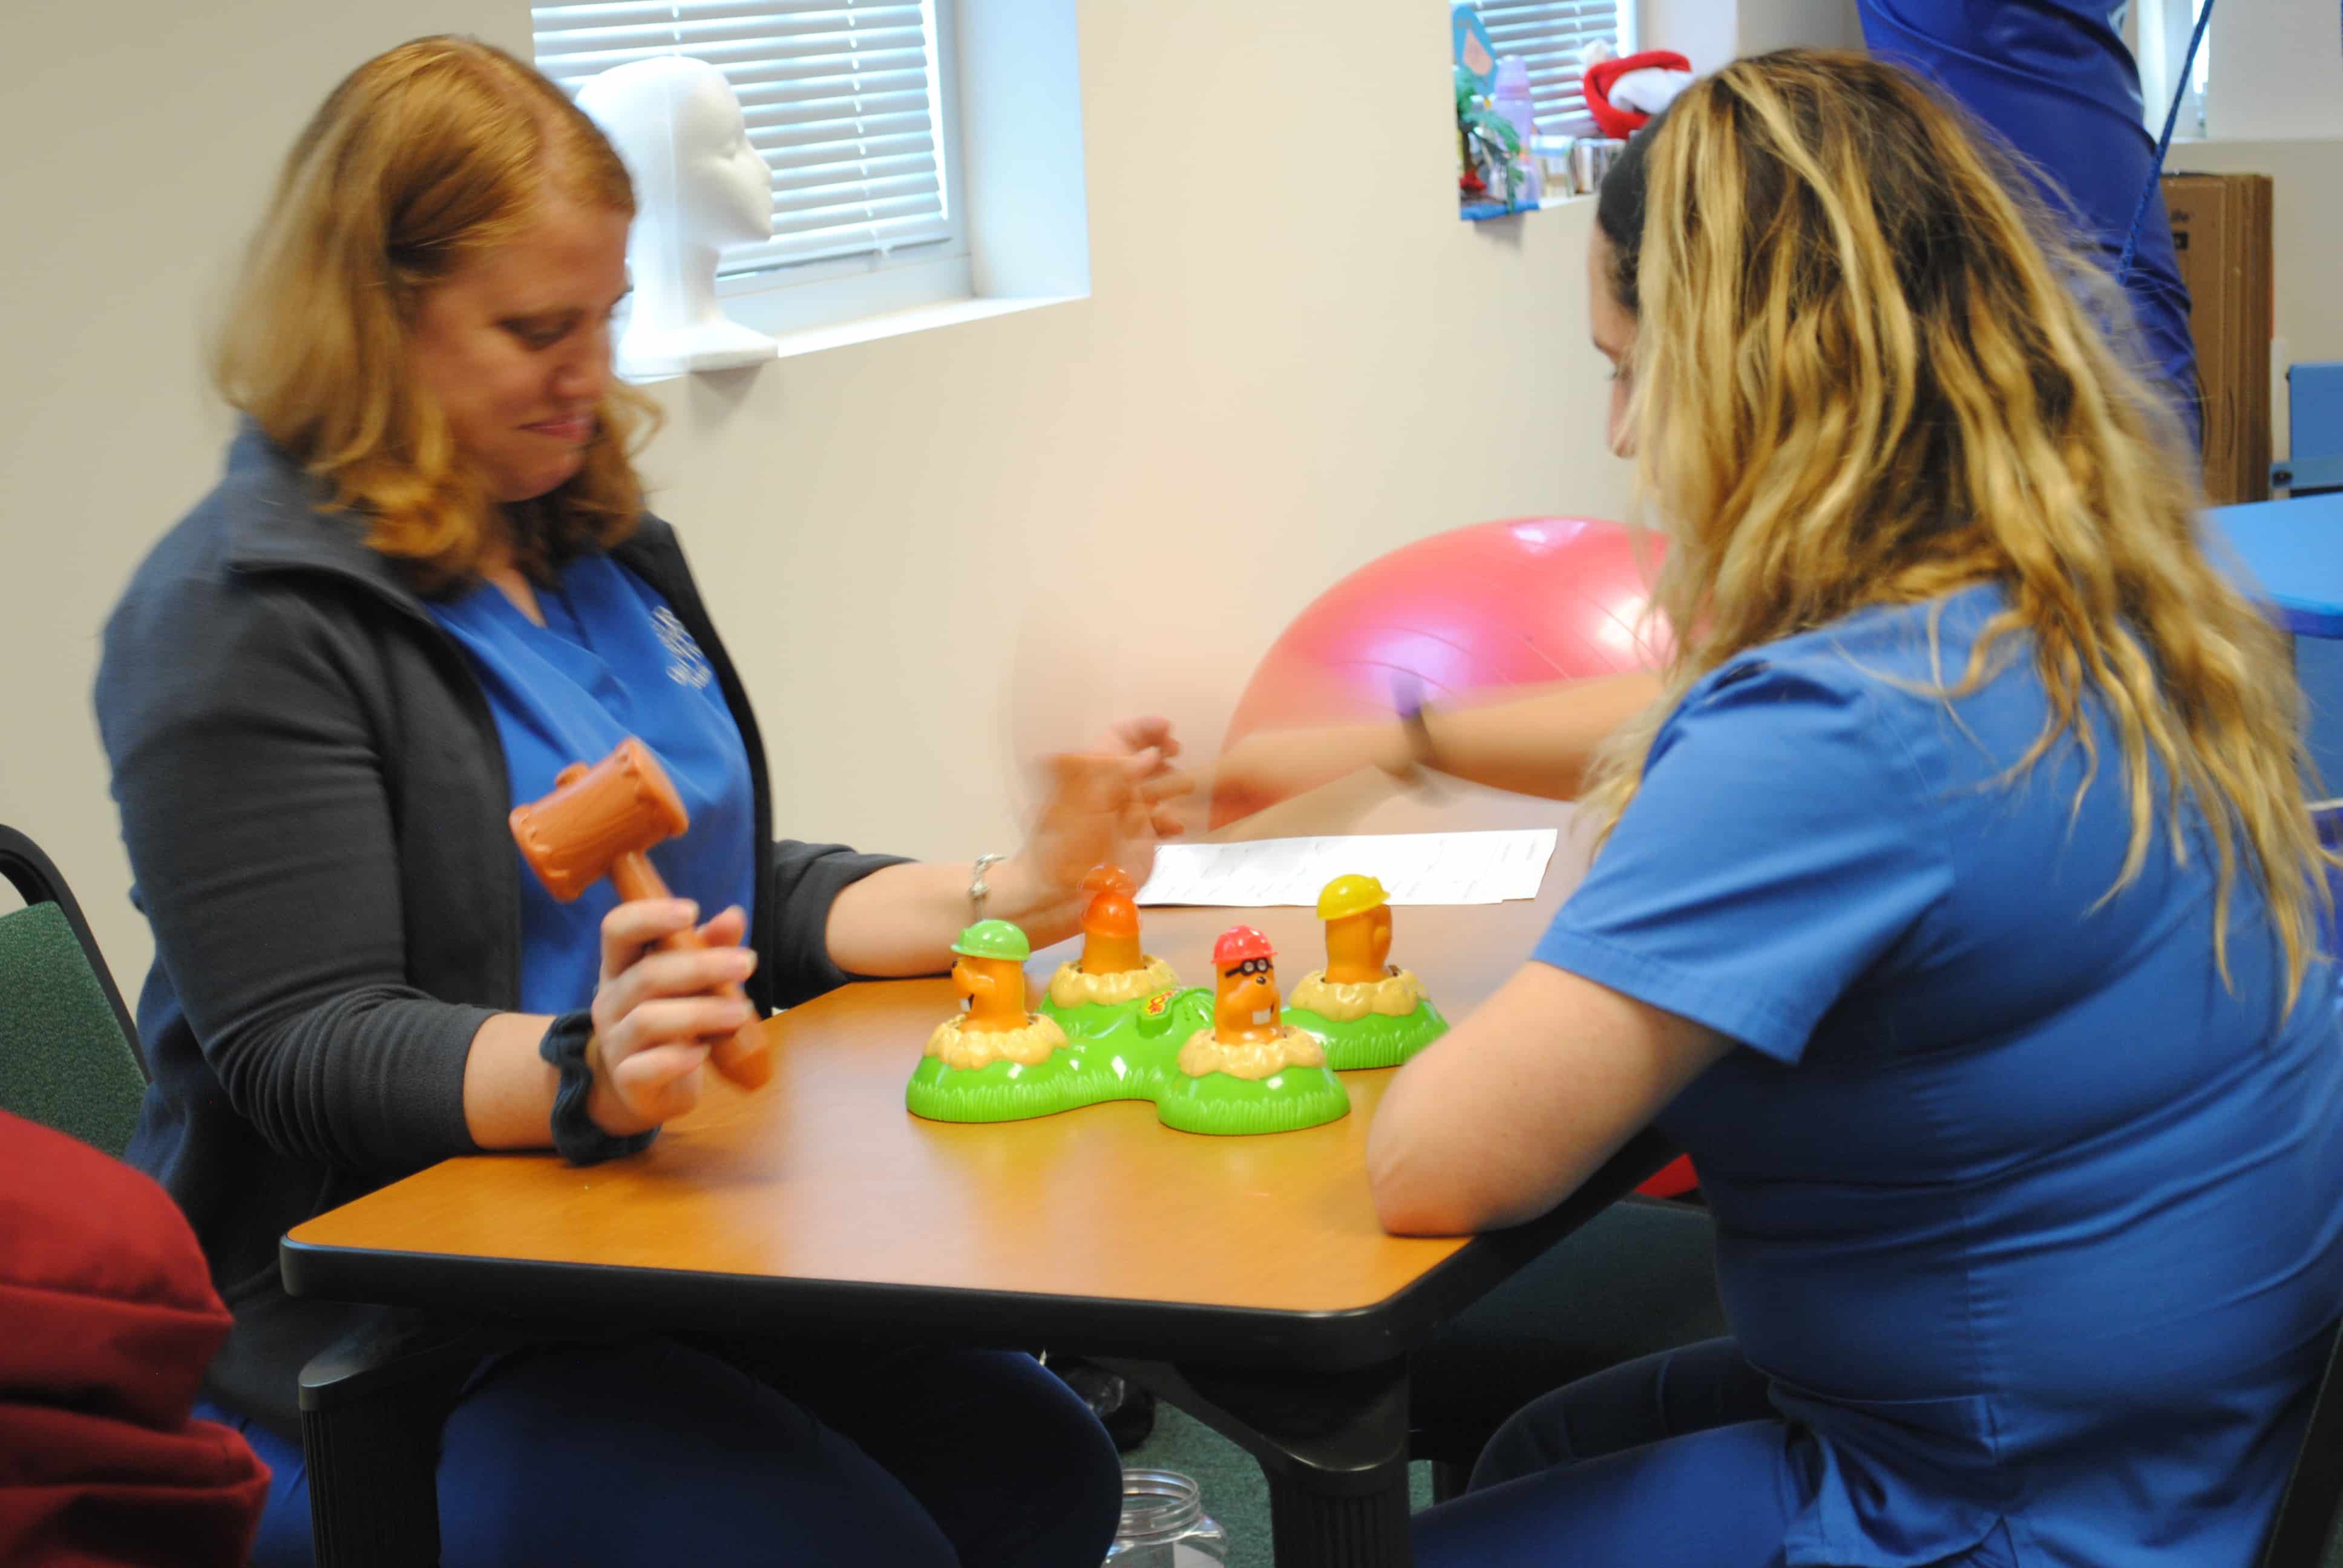 Occupational Therapy Assistant Students at the Miami Campus Learn how to Work with Children with Disabilities